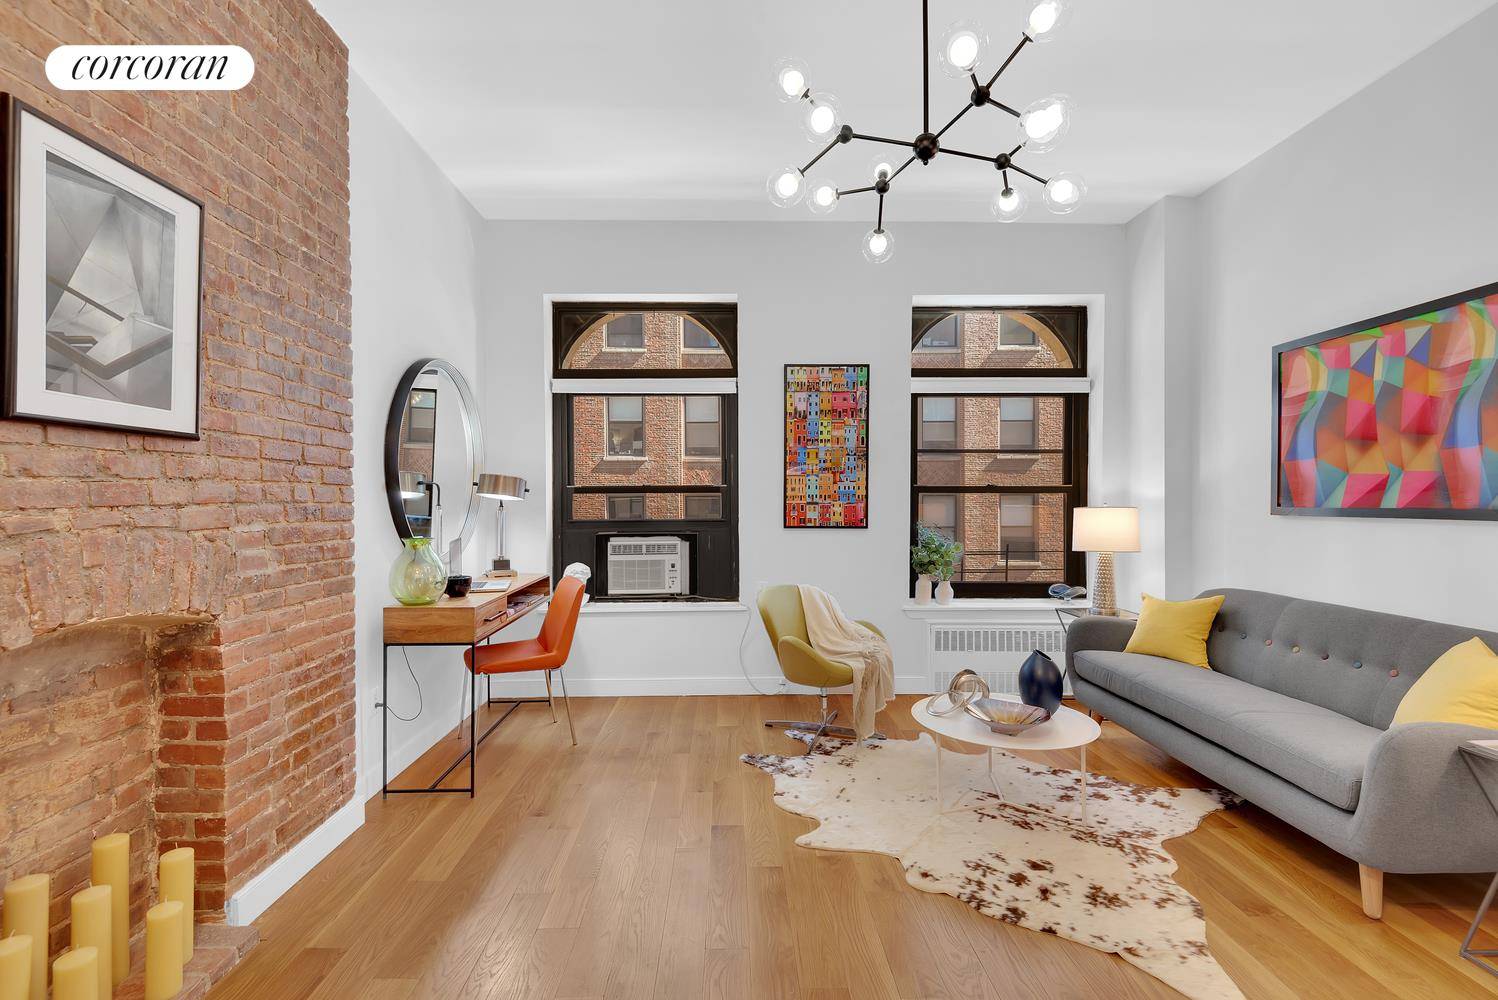 Discover your dream designer one bedroom apartment in the heart of Midtown Manhattan, just moments away from the vibrant neighborhoods of Hudson Yards, Chelsea, NoMad, and K Town.